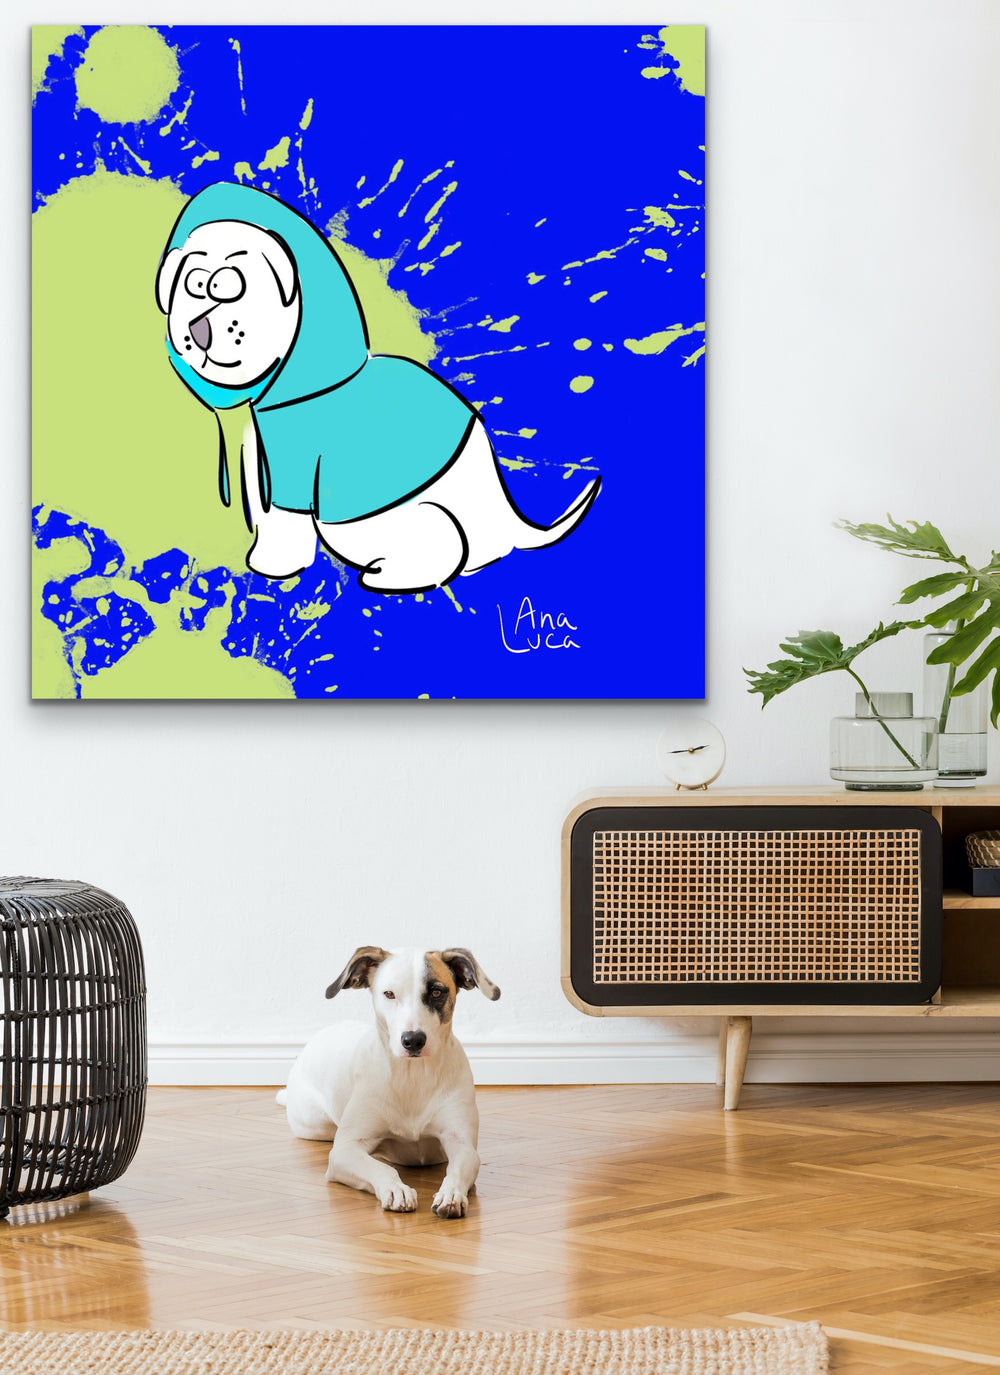 Chili Dog 48"X48" Limited Edition Framed Canvas Art (of 10)